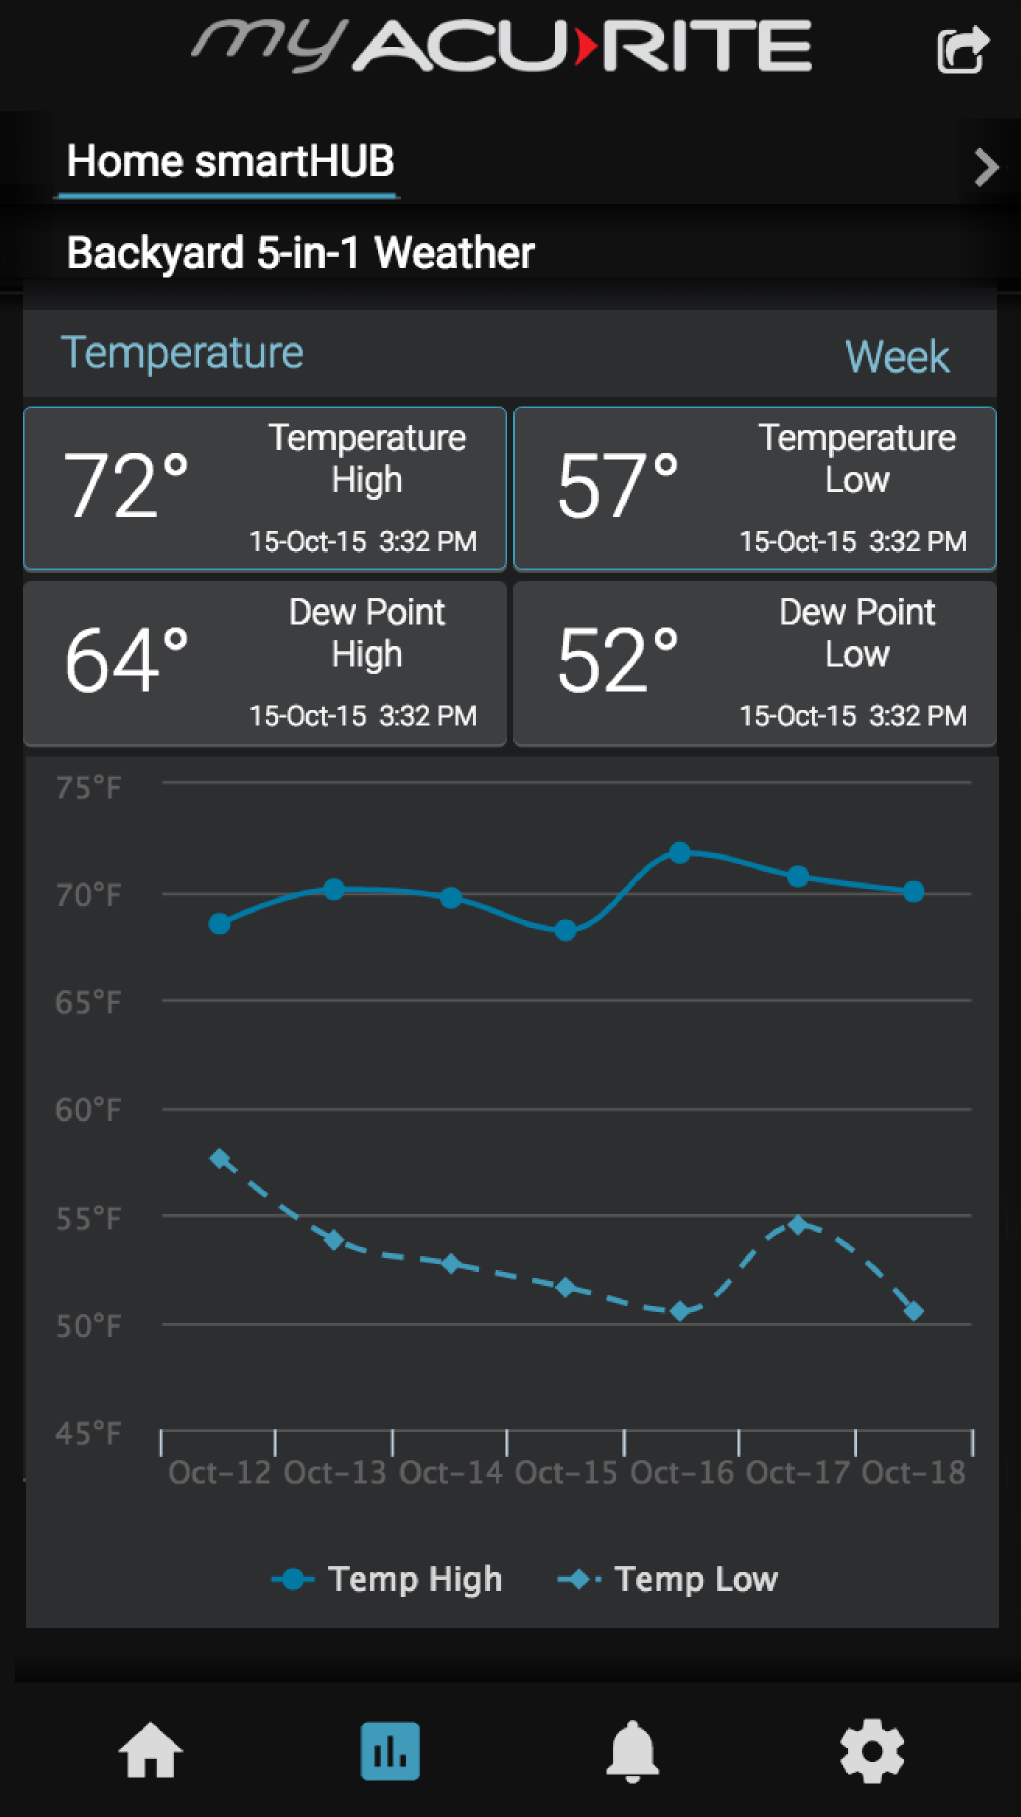 My AcuRite screenshot Backyard 5-in-1 overview with weekly temperature graph